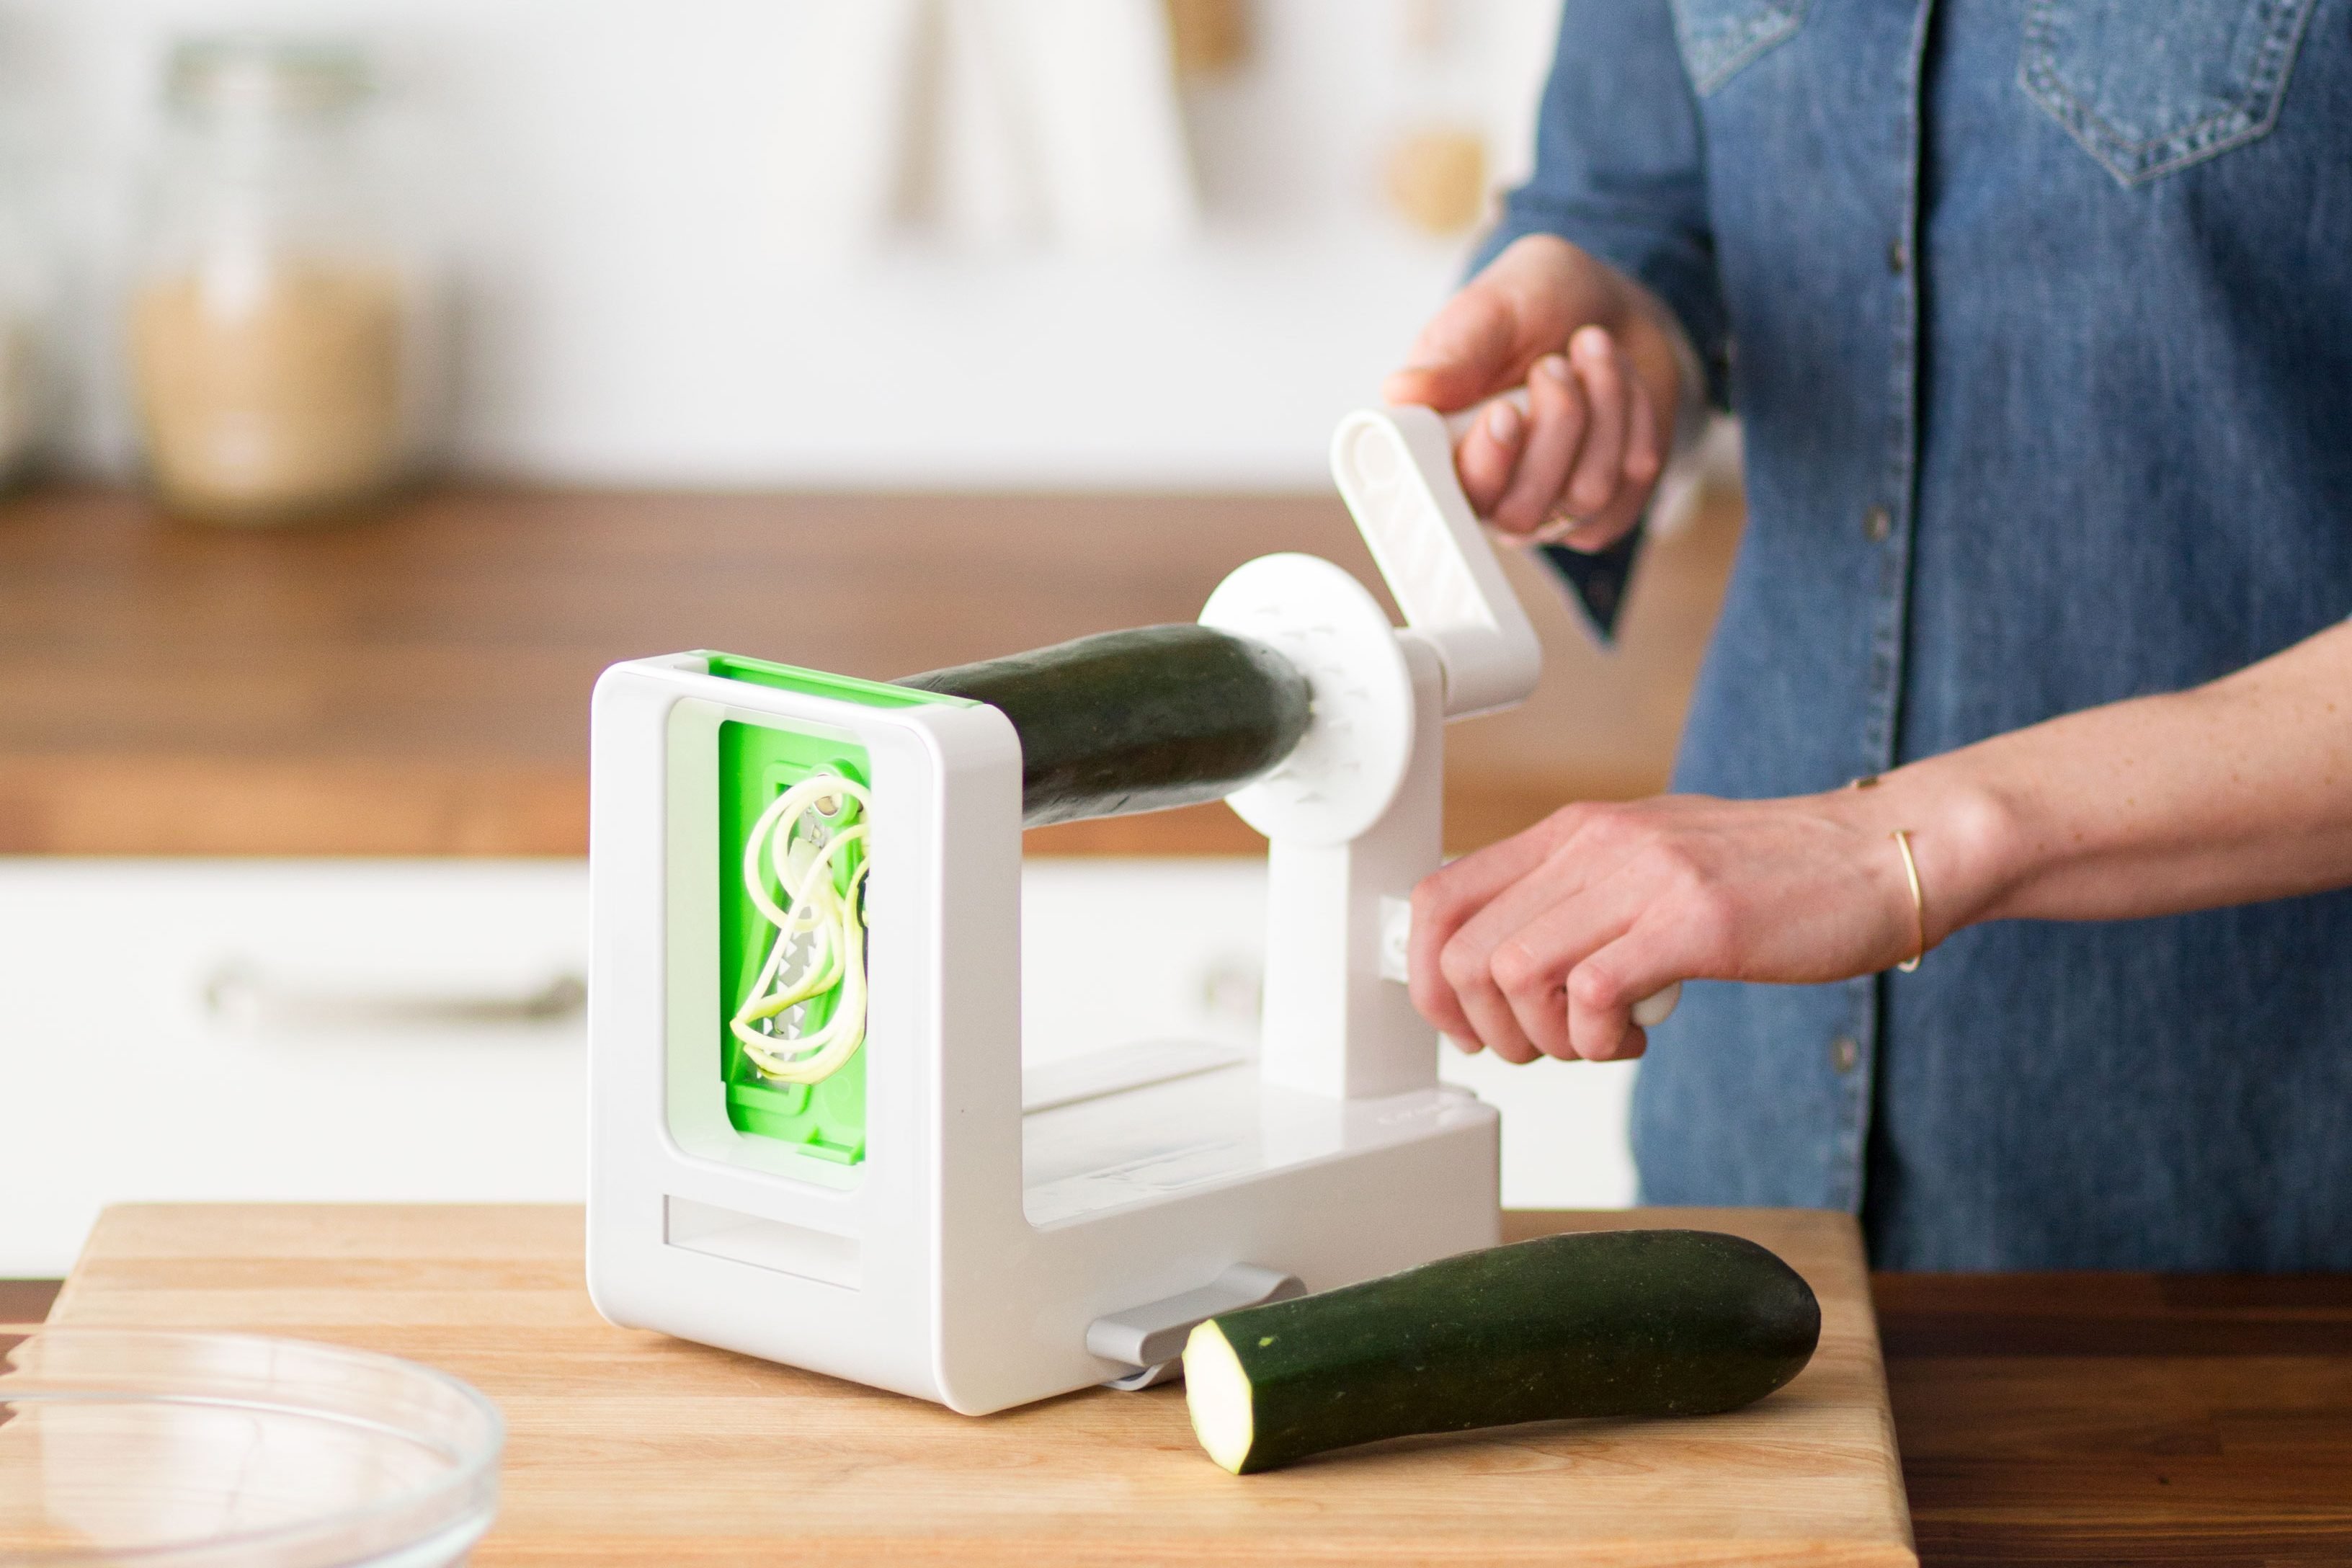 Turn vegetables into pasta with this spiralizer! It's 45% off!